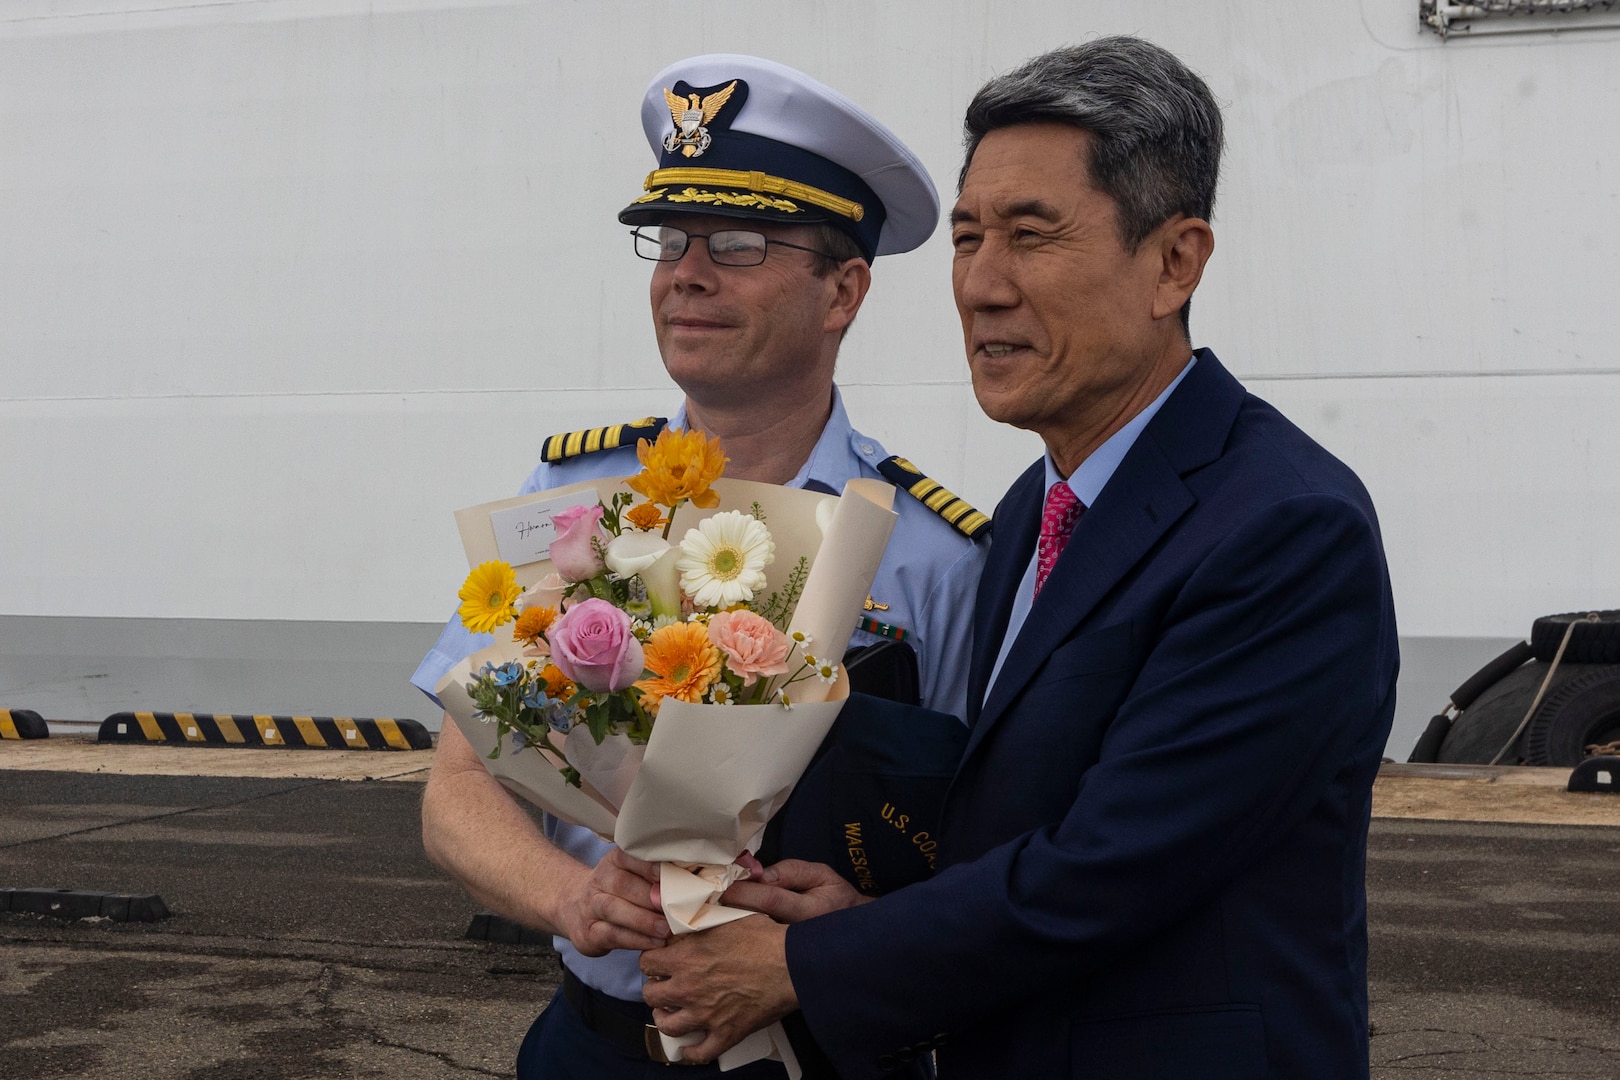 U.S. Coast Guard Capt. Tyson Scofield, the commanding officer of the U.S. Coast Guard Cutter Waesche (WMSL-751), receives a gift from Lee Kang-Deok, the mayor of Pohang, Republic of Korea, during welcoming reception in Pohang, Republic of Korea, June 9, 2024. U.S. Coast Guardsmen assigned to the Waesche were greeted by members of the Korea Coast Guard upon their arrival to Pohang. The U.S. Coast Guard has operated in the Indo-Pacific for more than 150 years, and the service is increasing efforts through targeted patrols with our National Security Cutters, Fast Response Cutters and other activities in support of Coast Guard missions to enhance our partnership. (U.S. Marine Corps photo by Cpl. Elijah Murphy)